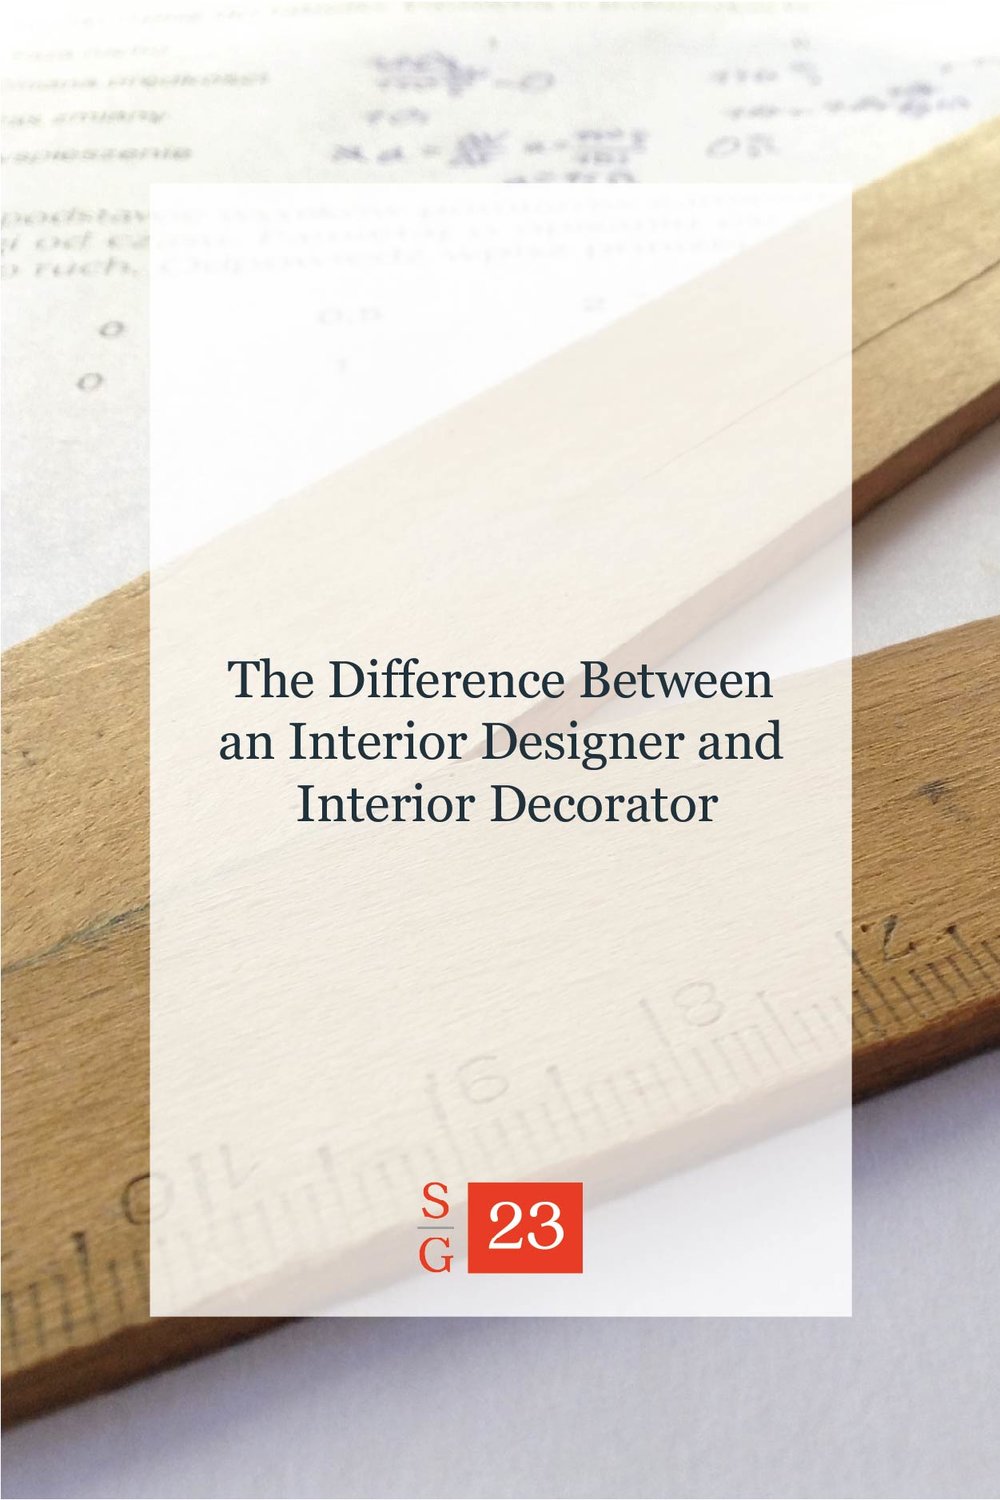 Difference Between An Interior Designer And Interior